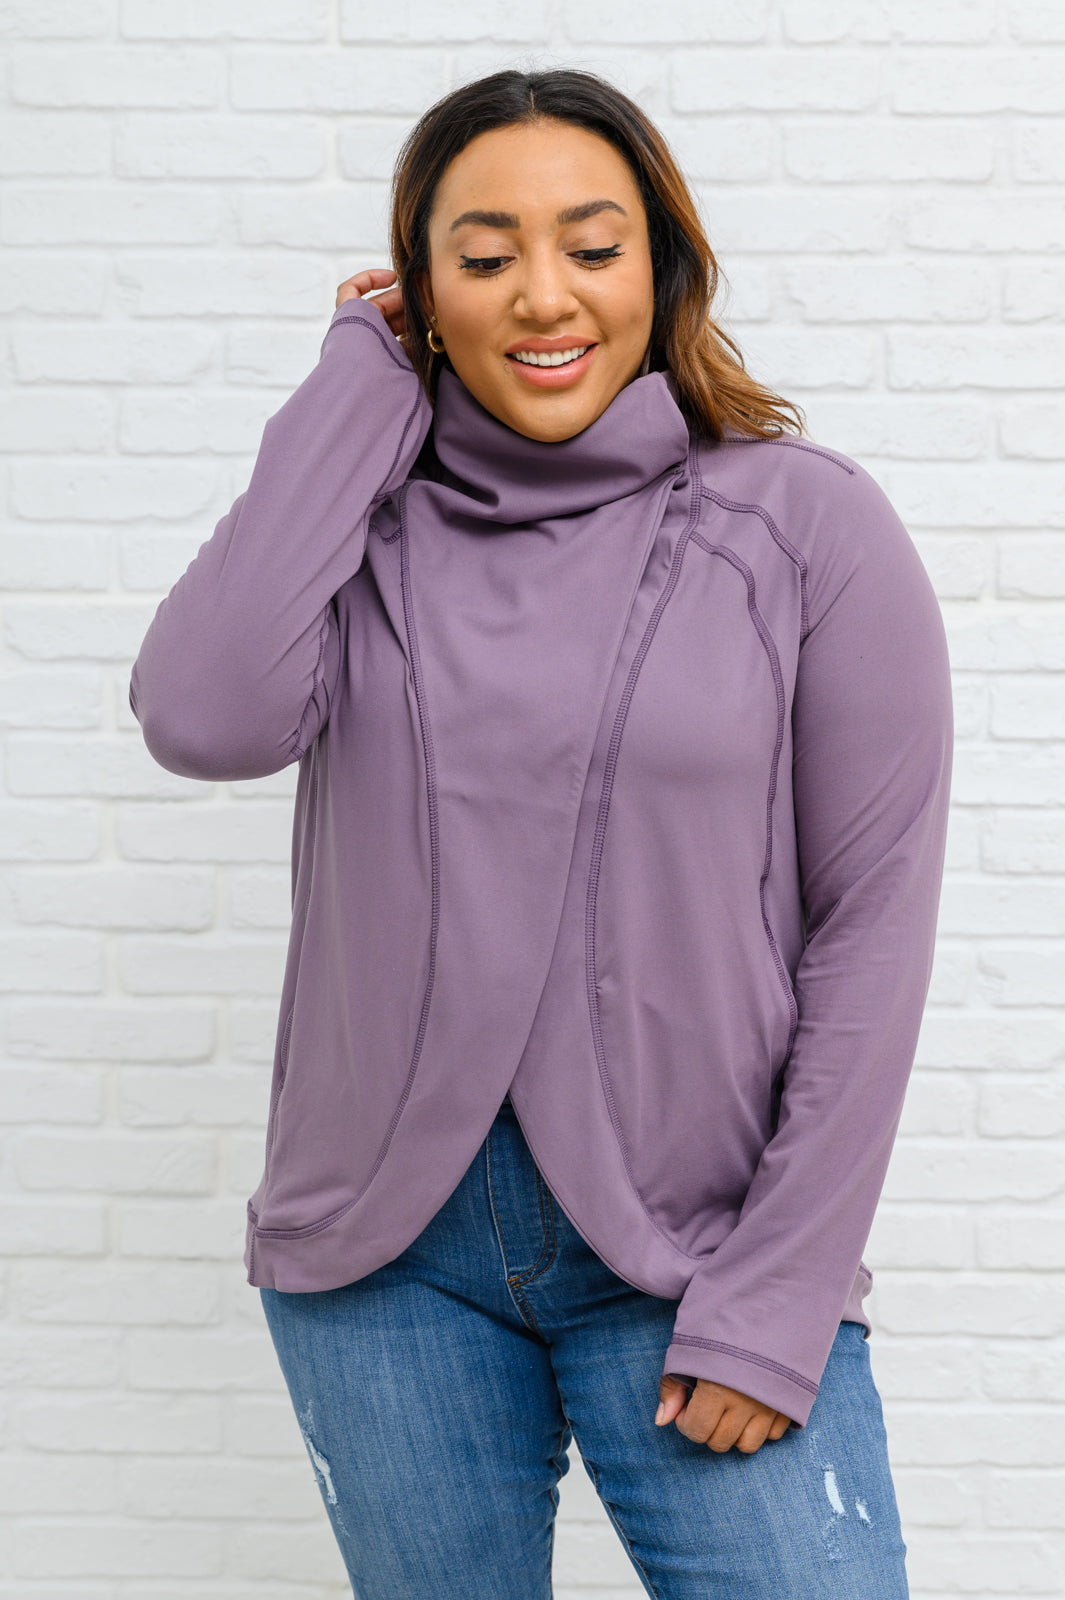 Sport a Look Asymmetric Cowl Neck Jacket In Mulberry   